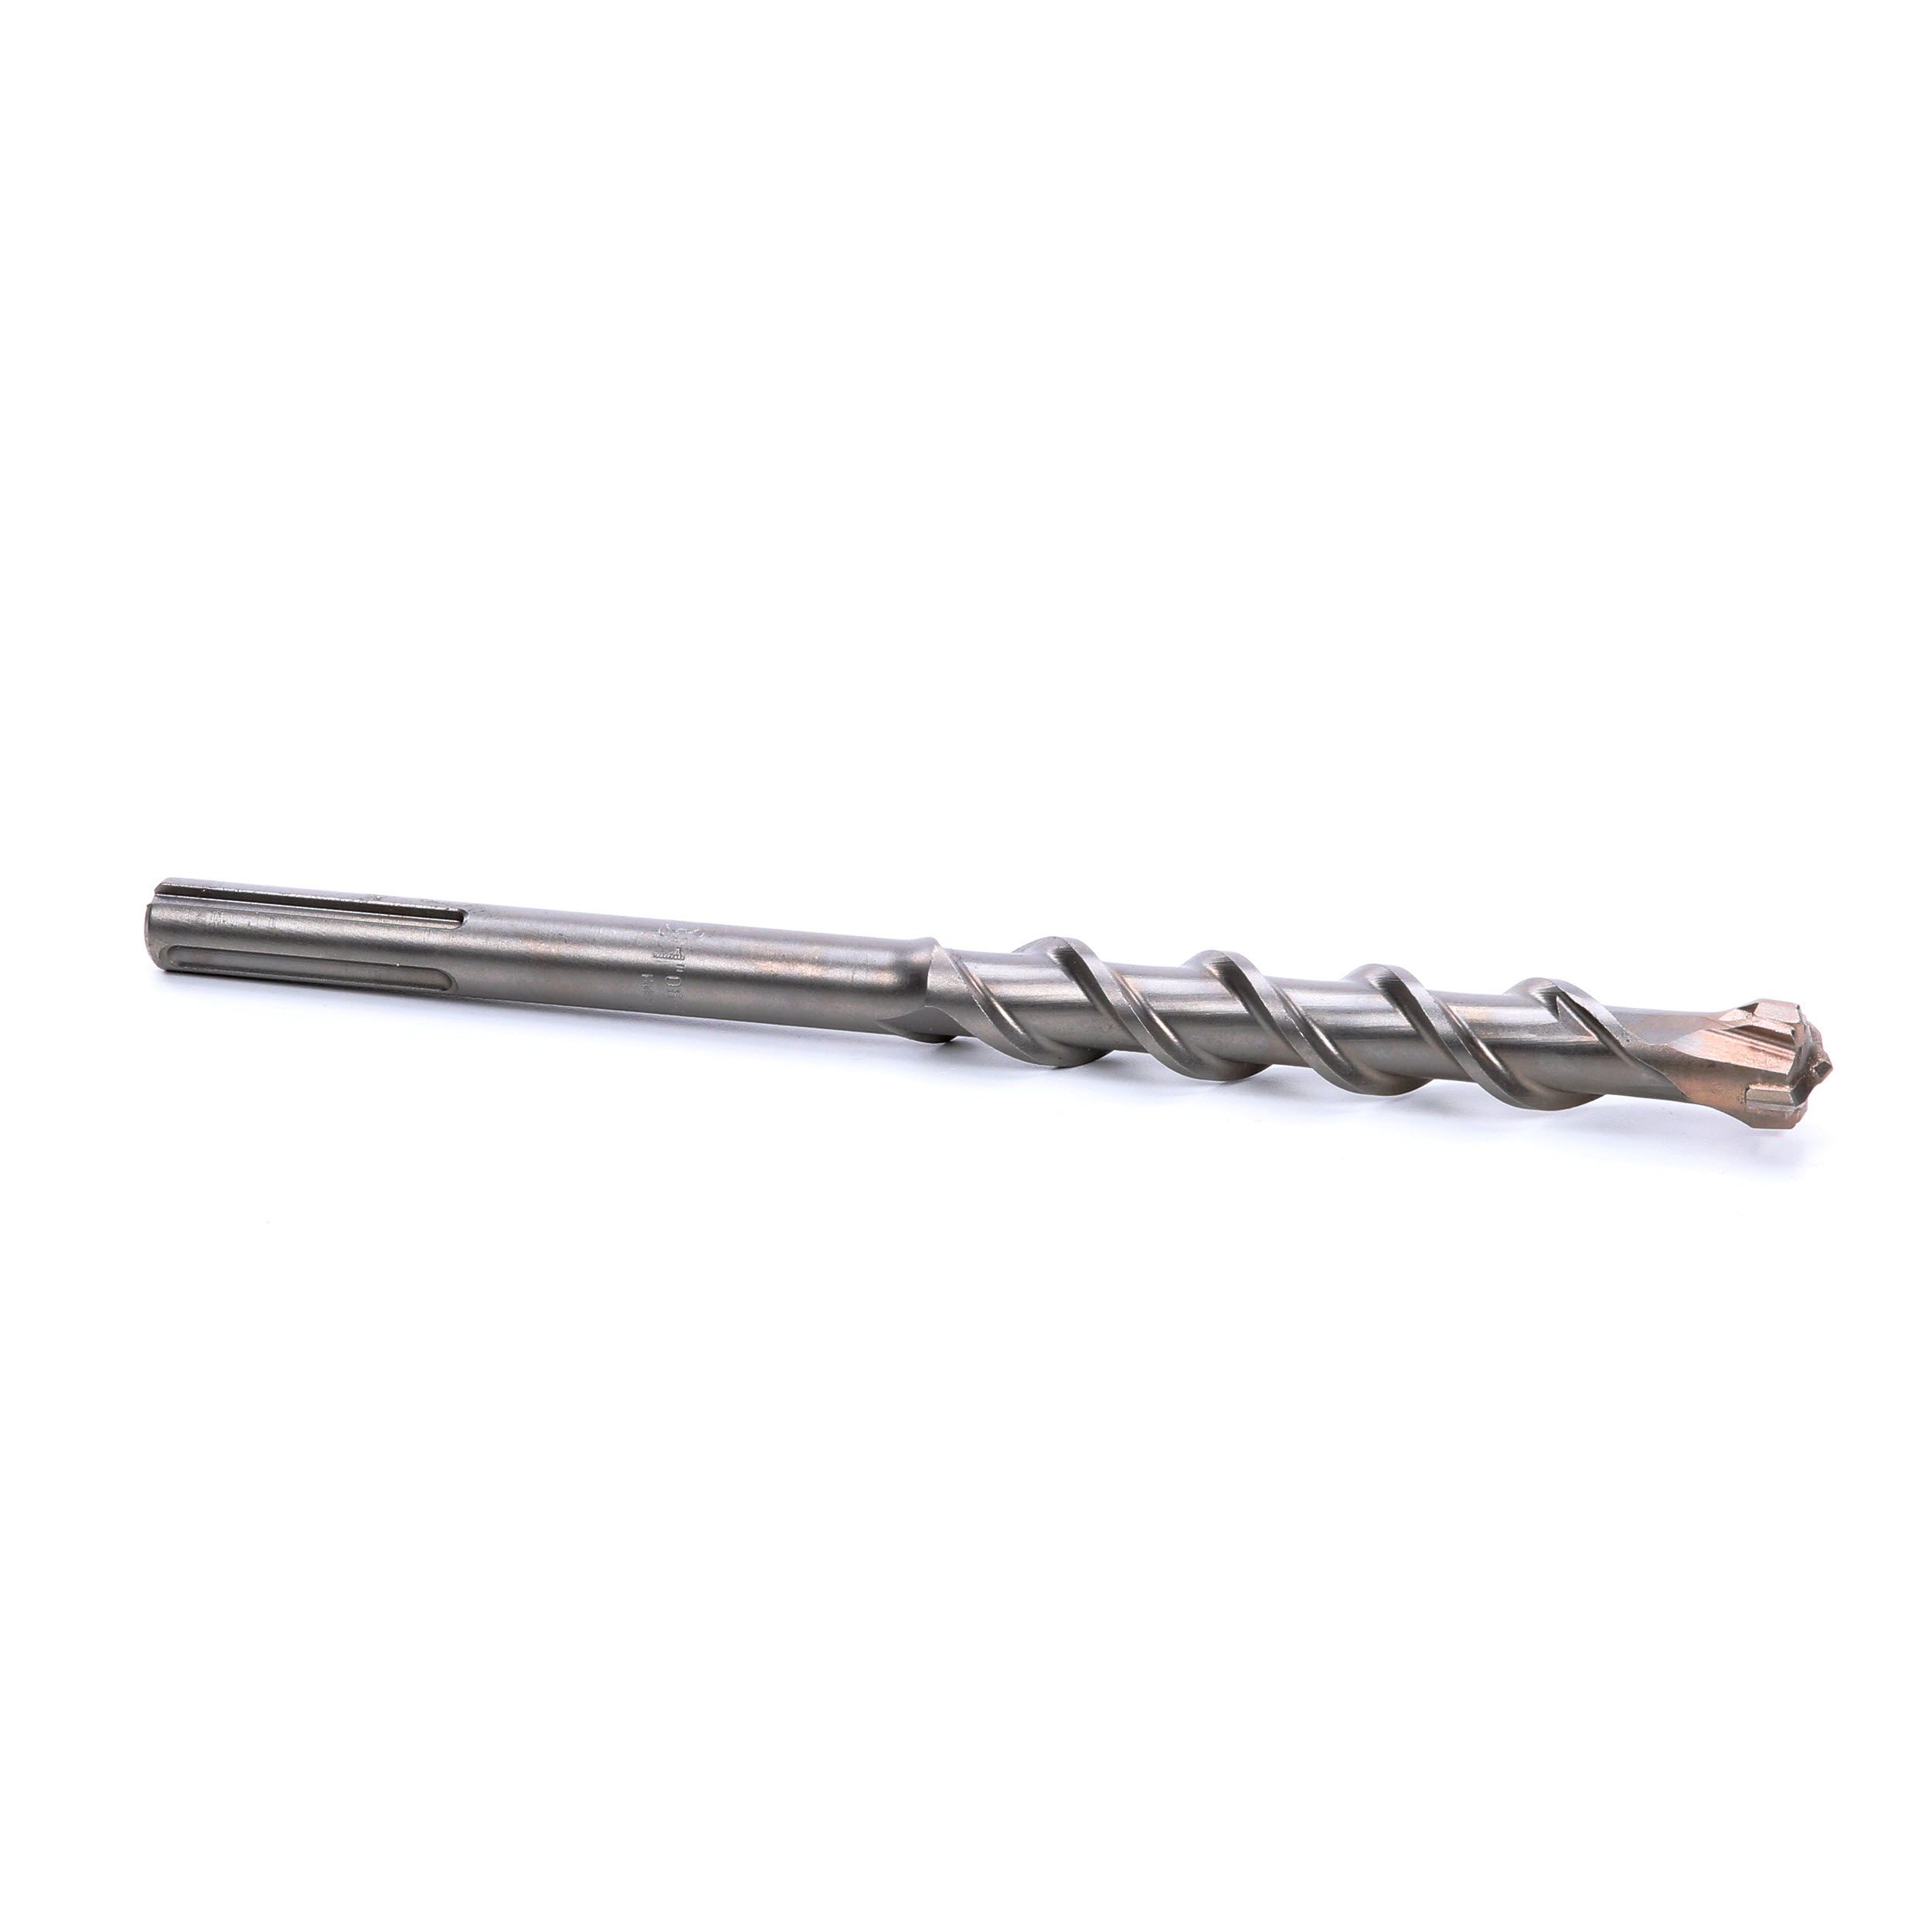 ITM 1 X 13 SDS Max Carbide Rotary Hammer X-cutter Drill Bit for Bosch Qty1 for sale online 